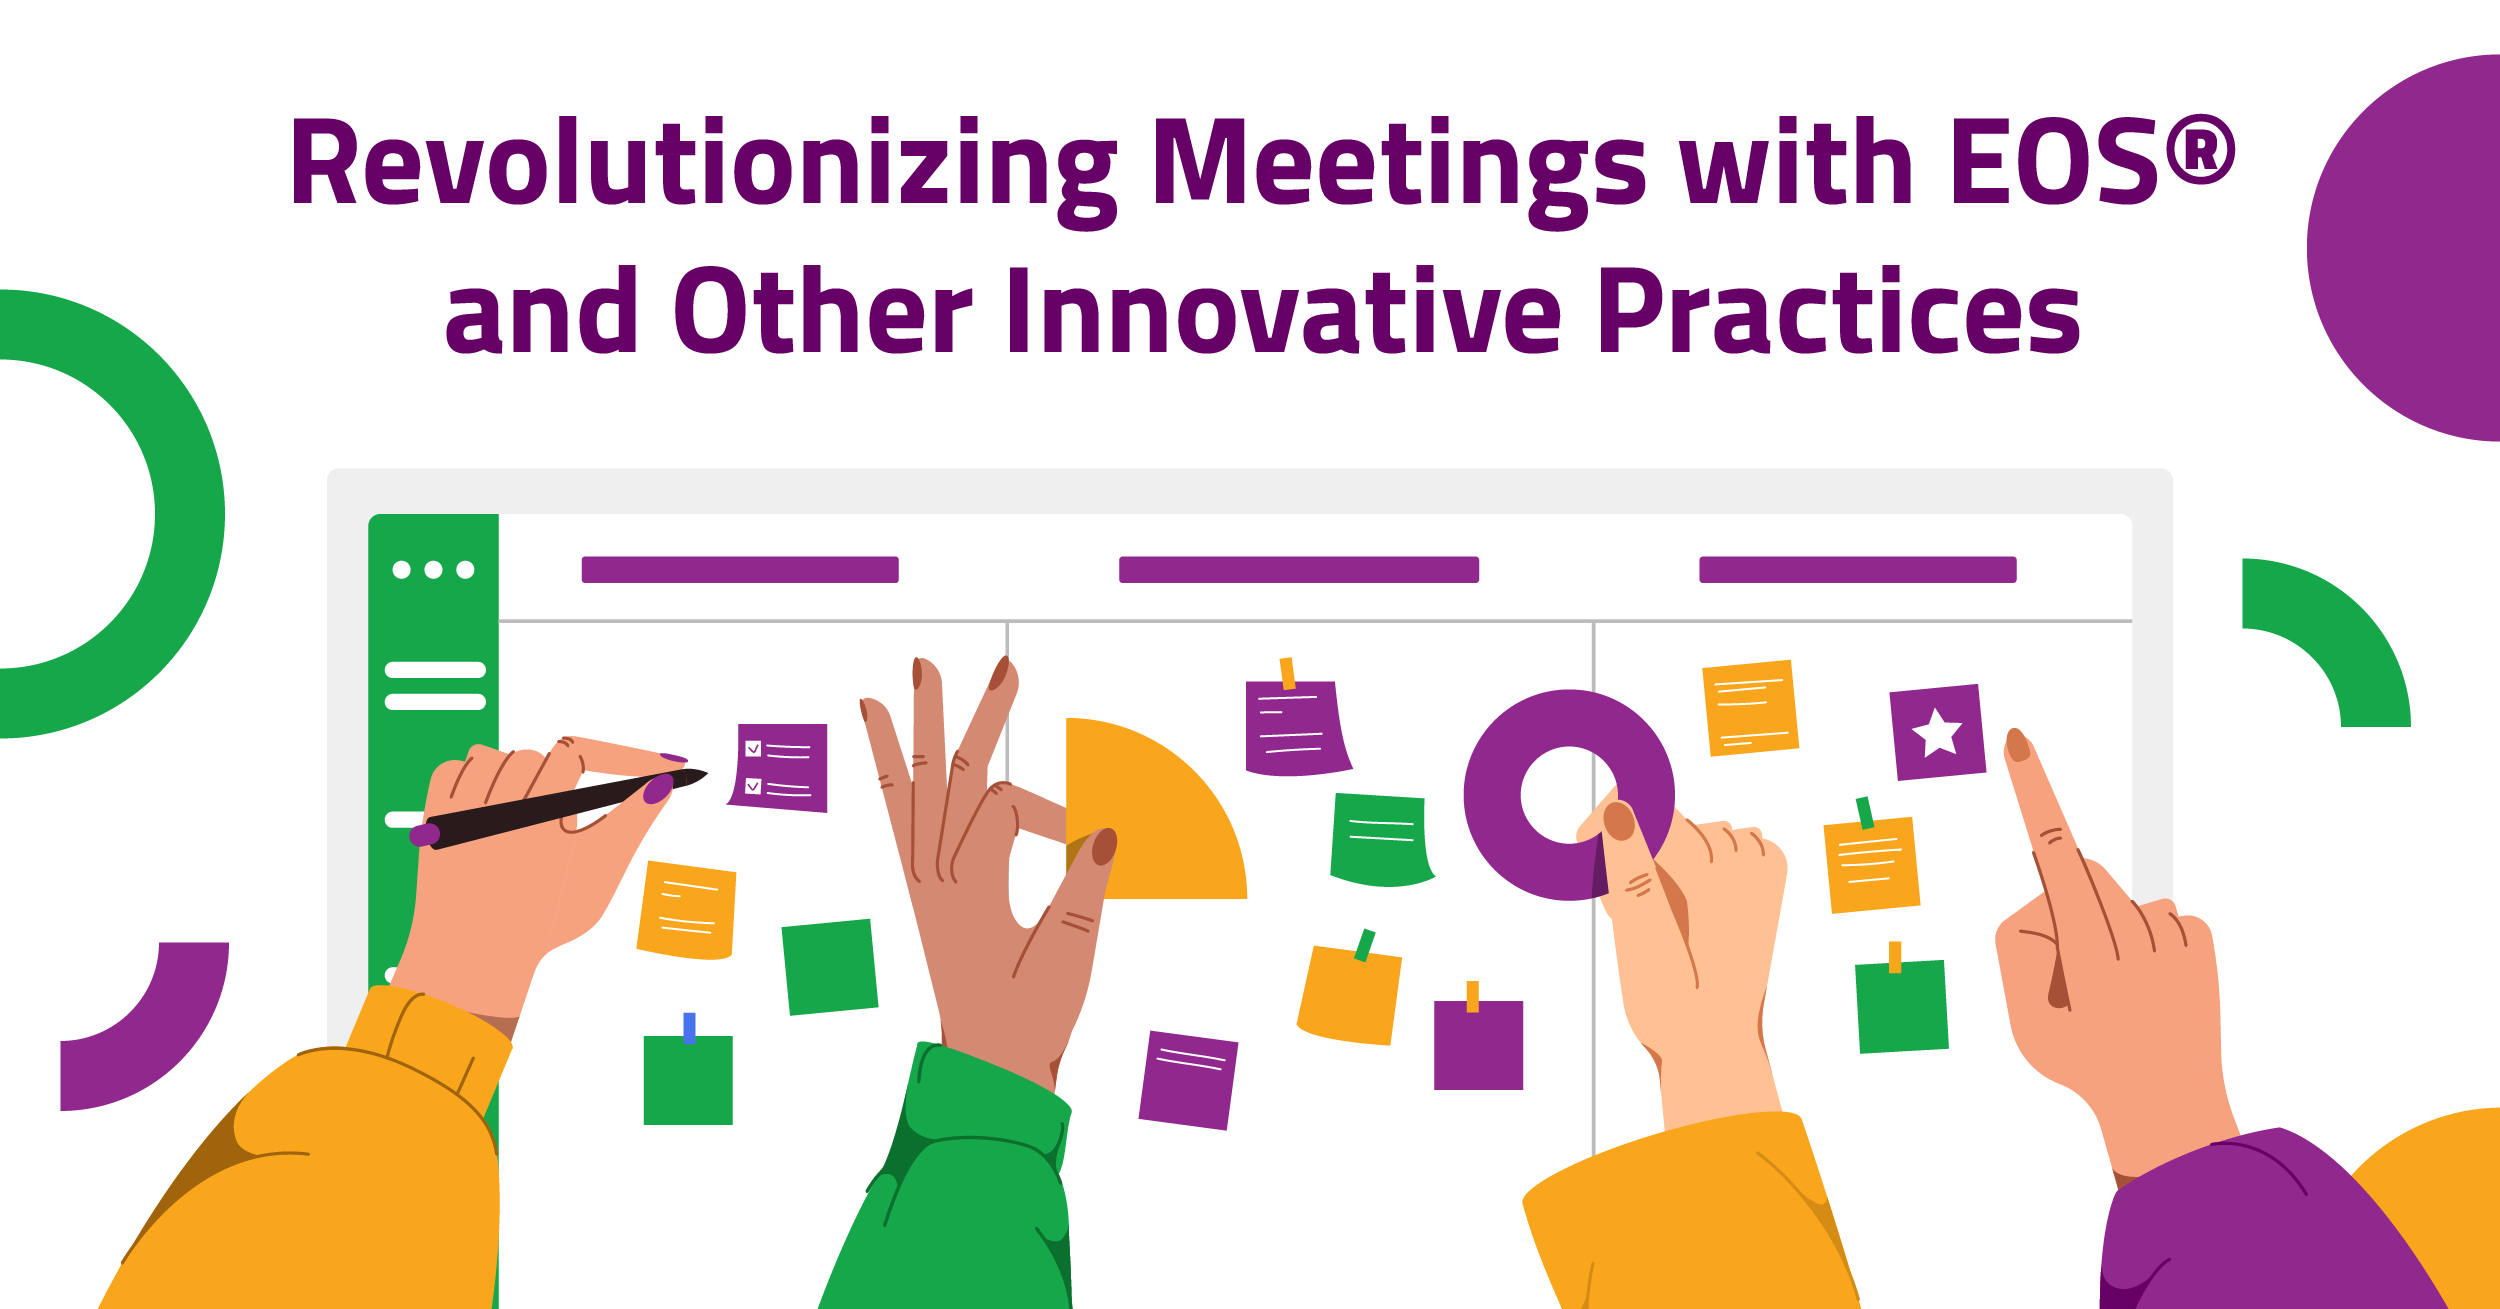 Revolutionizing Meetings with EOS® and Other Innovative Practices